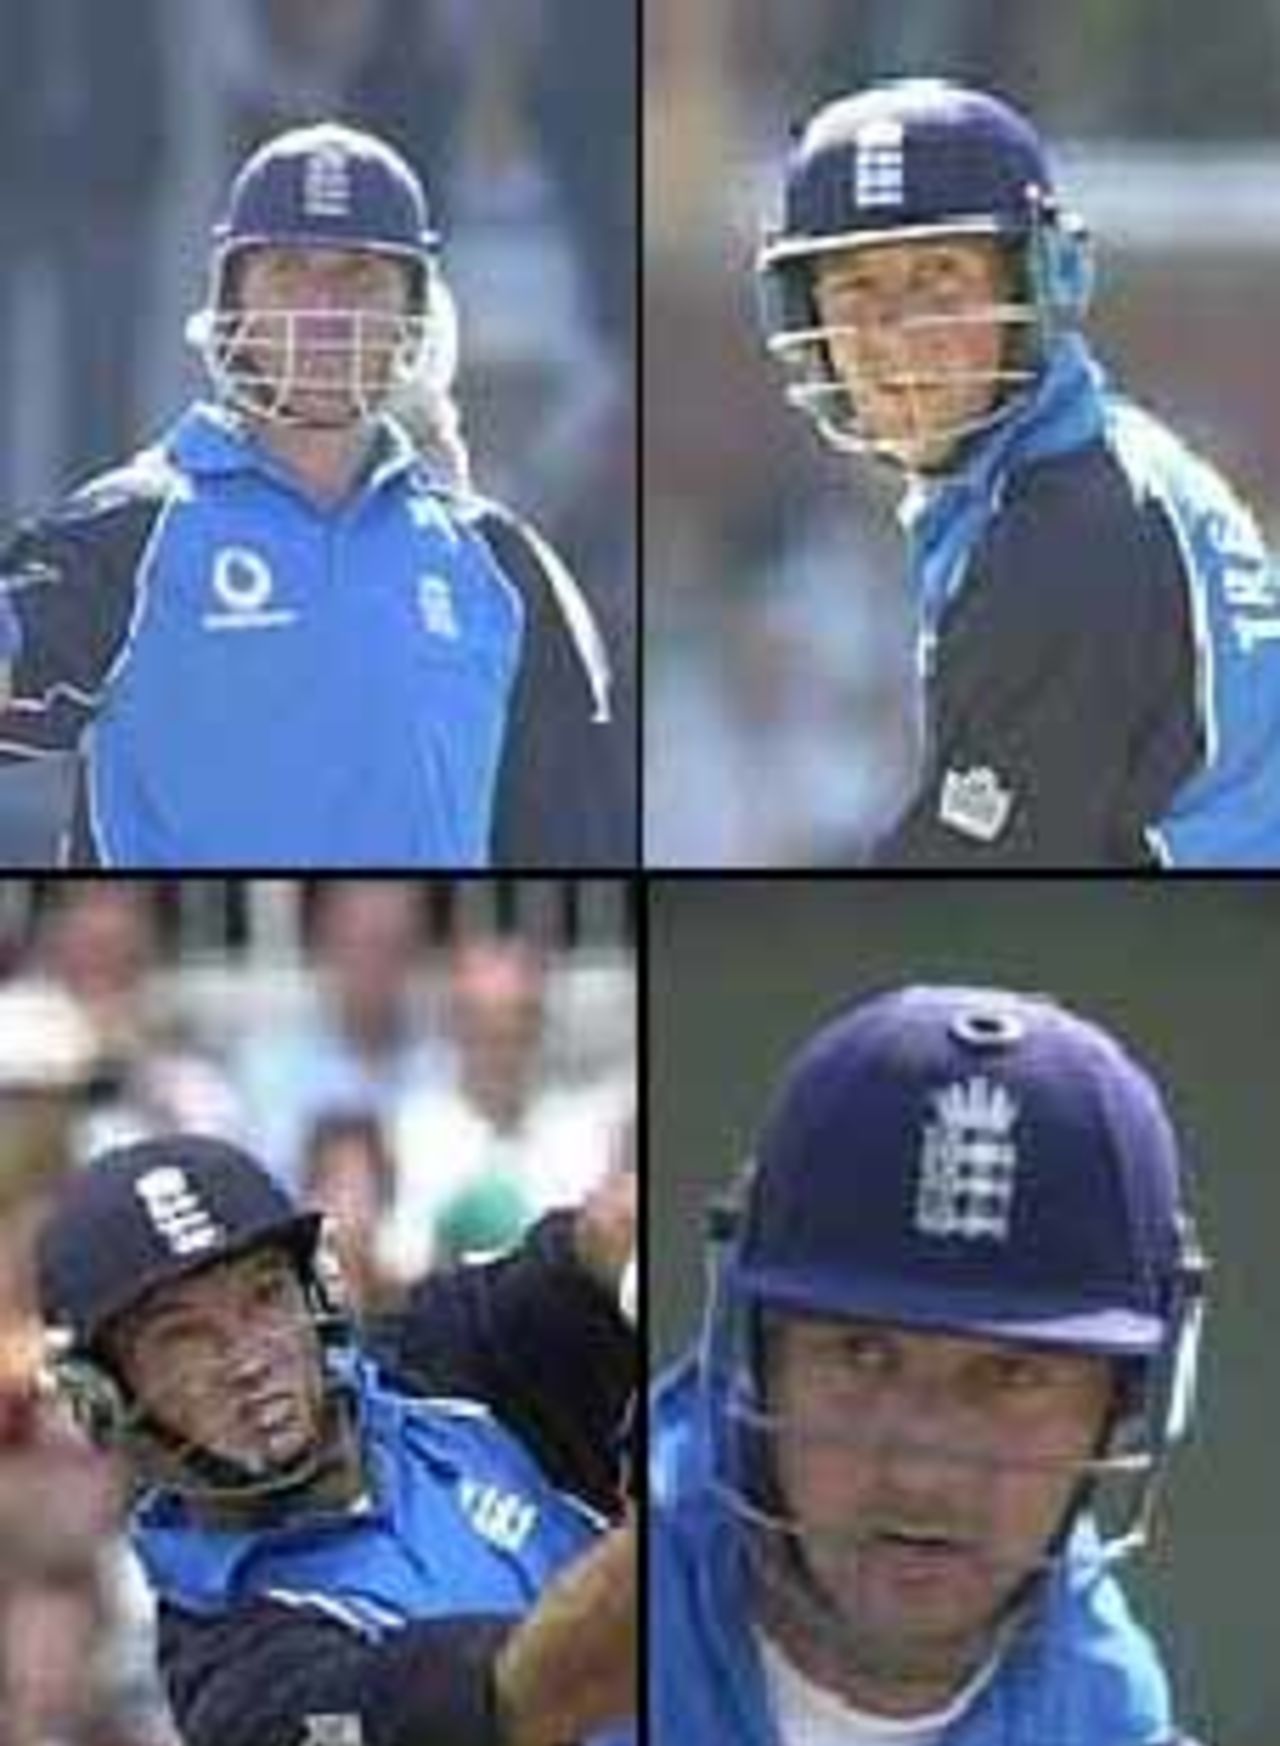 Top row is Stewart and Trescothick (r), bottom row is Hick and Thorpe (r)